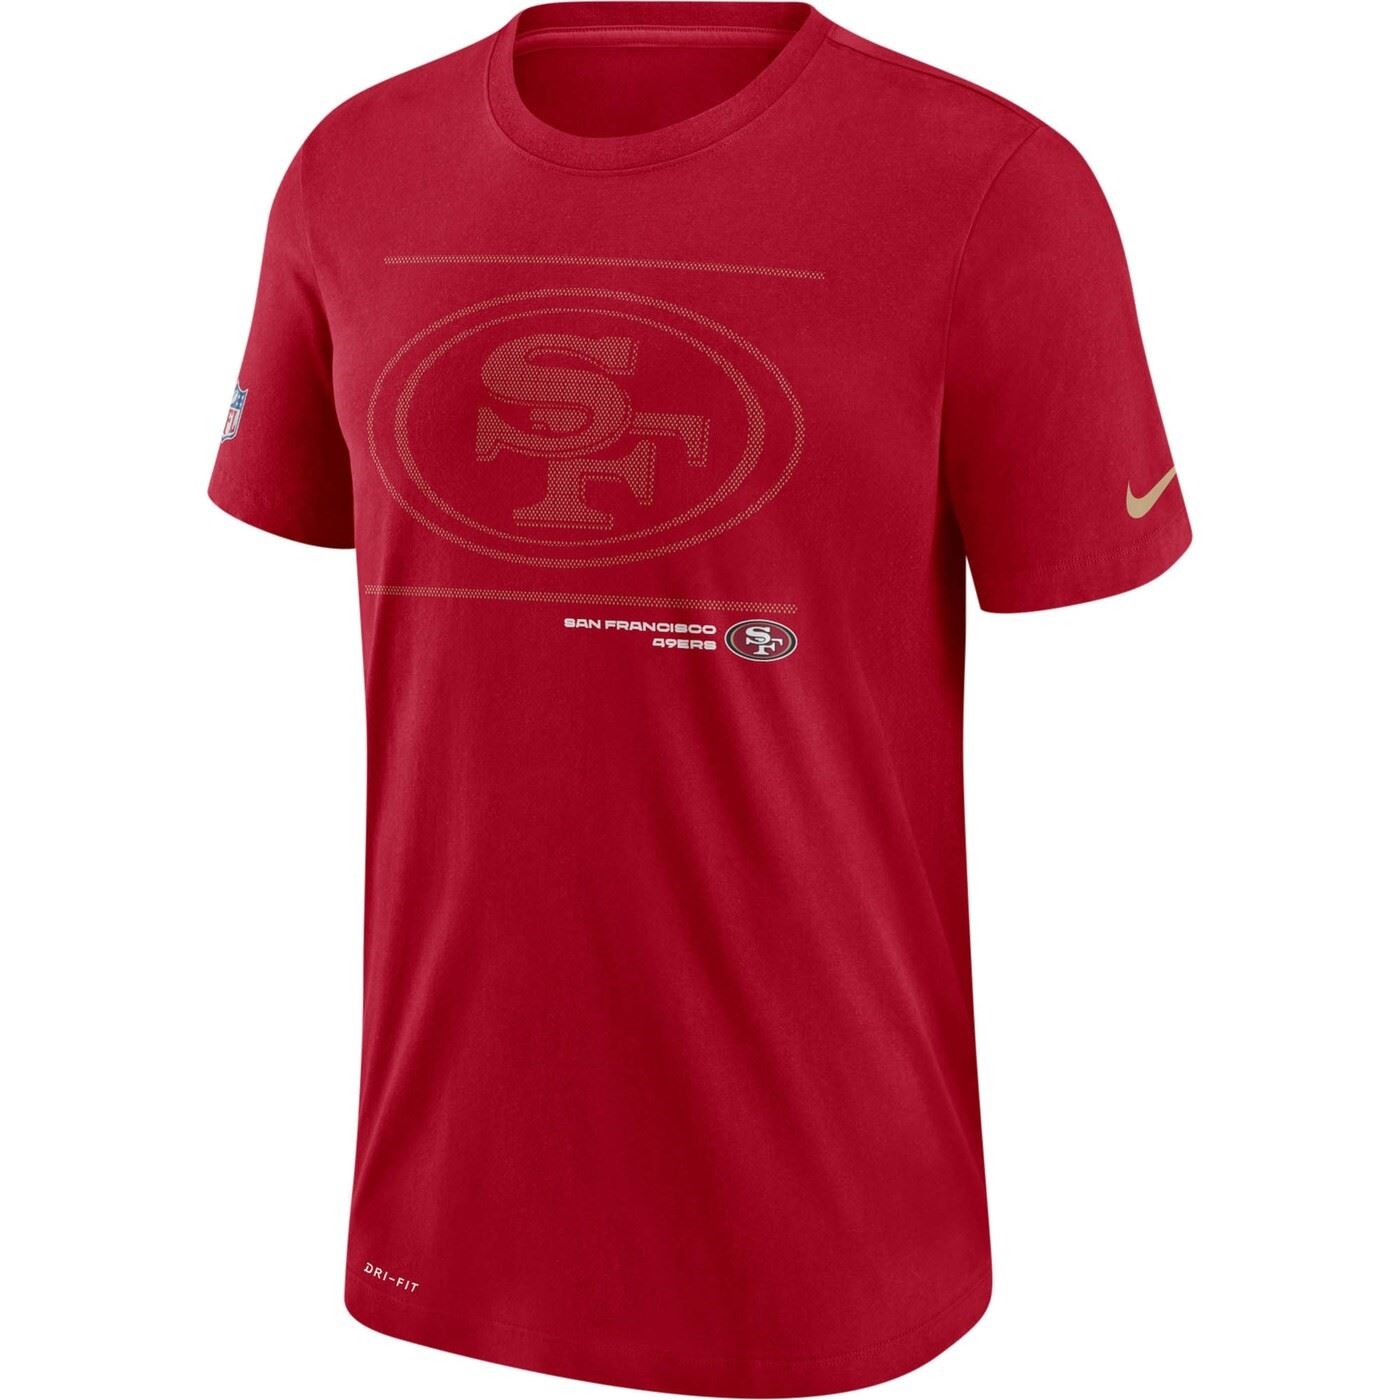 San Francisco 49ers NFL DFCT Team Issue Tee Red T-Shirt Nike